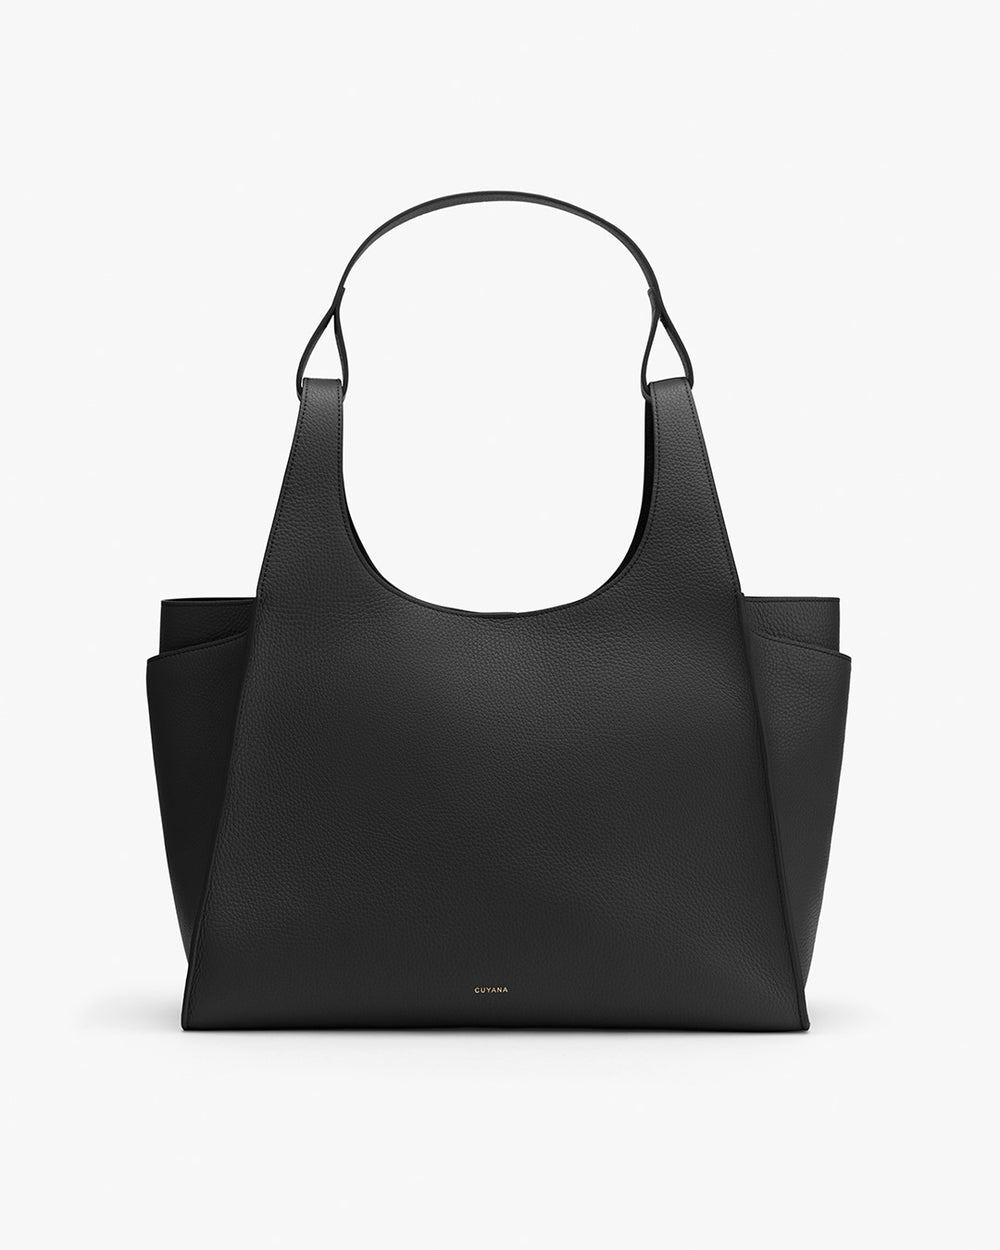 Large handbag with a central handle and two side compartments.